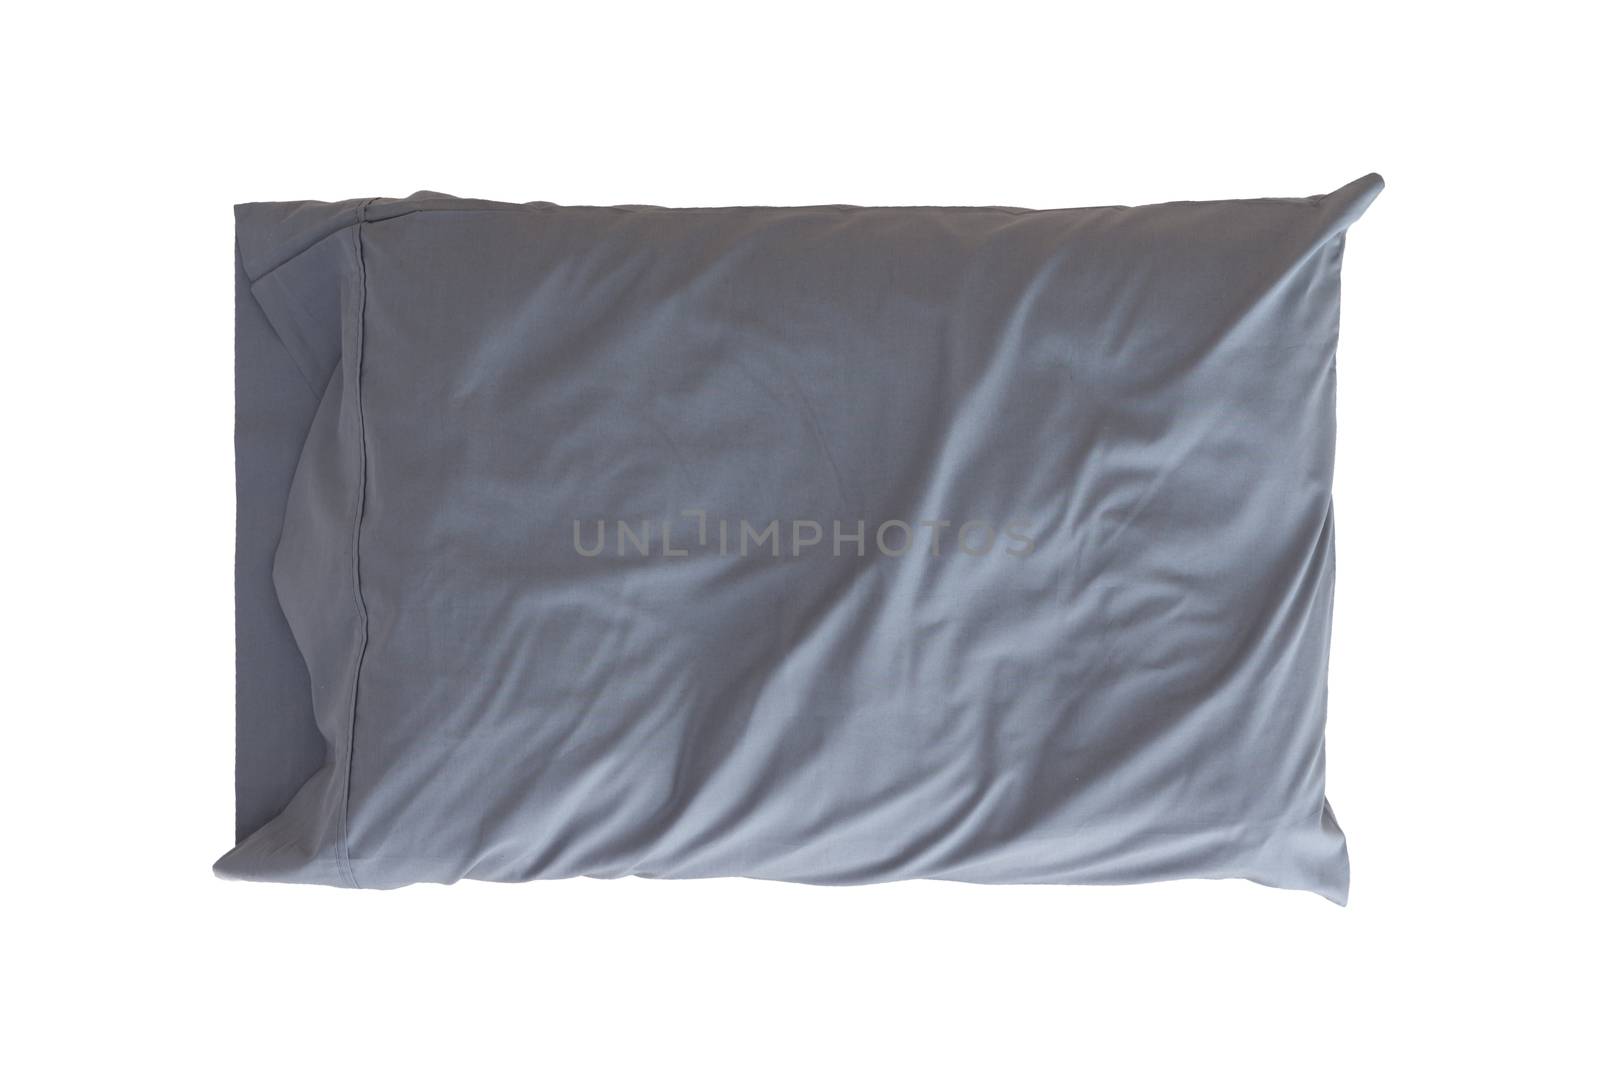 Comfortable soft pillow in a wrinkled grey pillowcase for protection and hygiene isolated on white